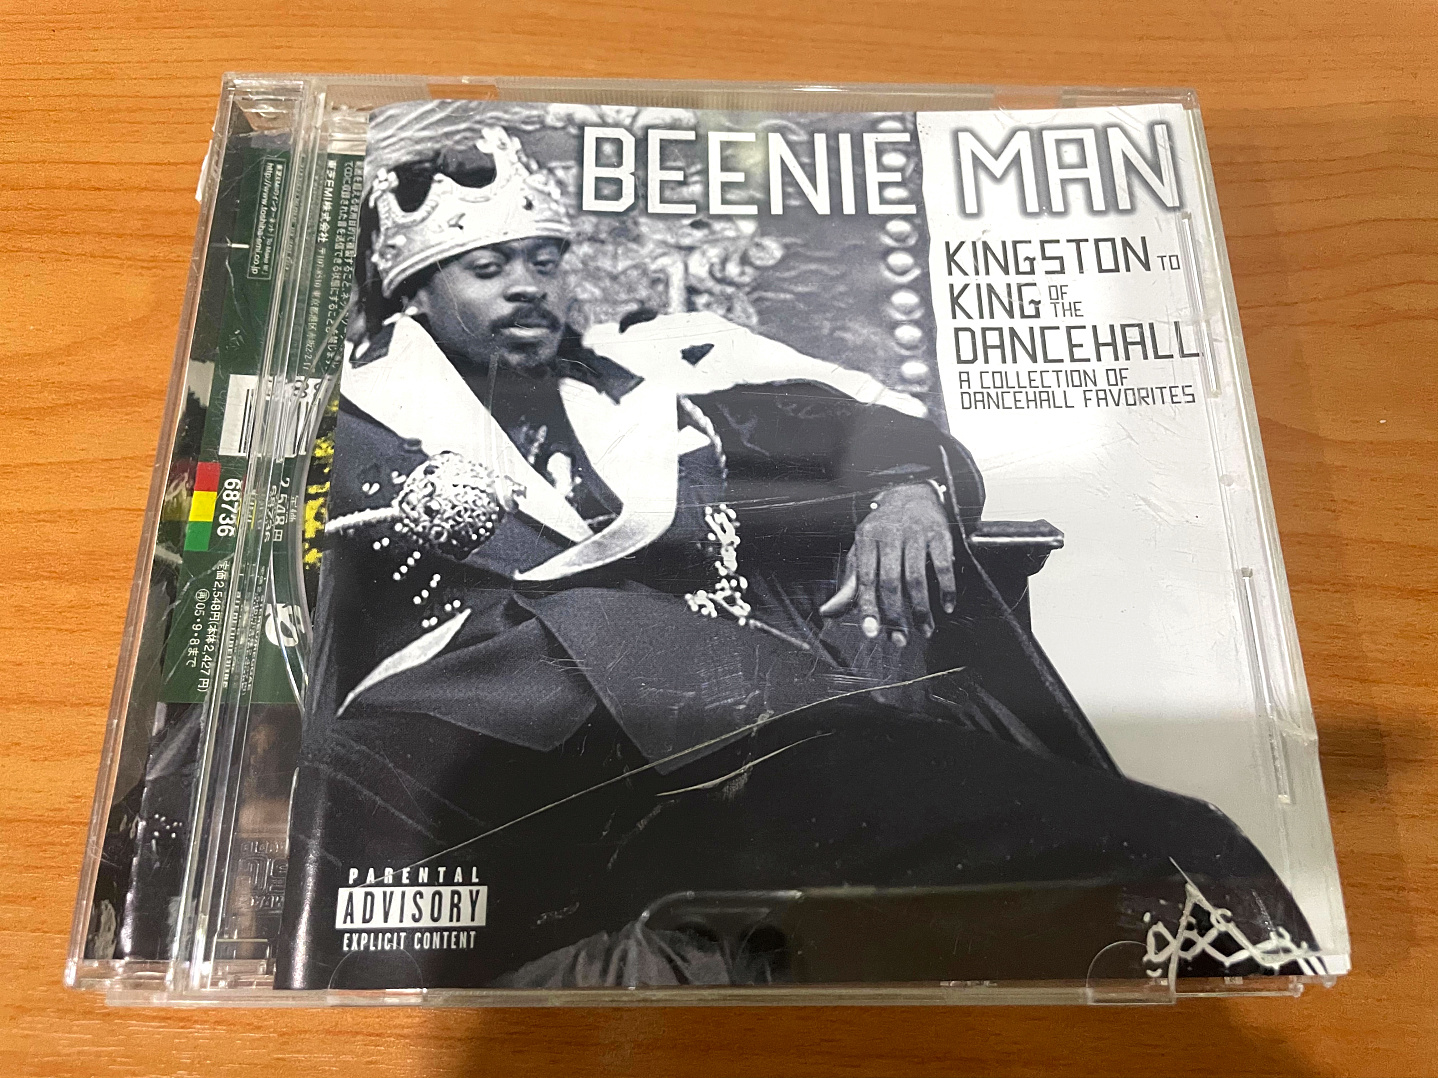 CD BEENIE MAN KINGSTON TO KING OF THE DANCEHRLL A COLLECTION OF DANCEHRLL FRVORITES